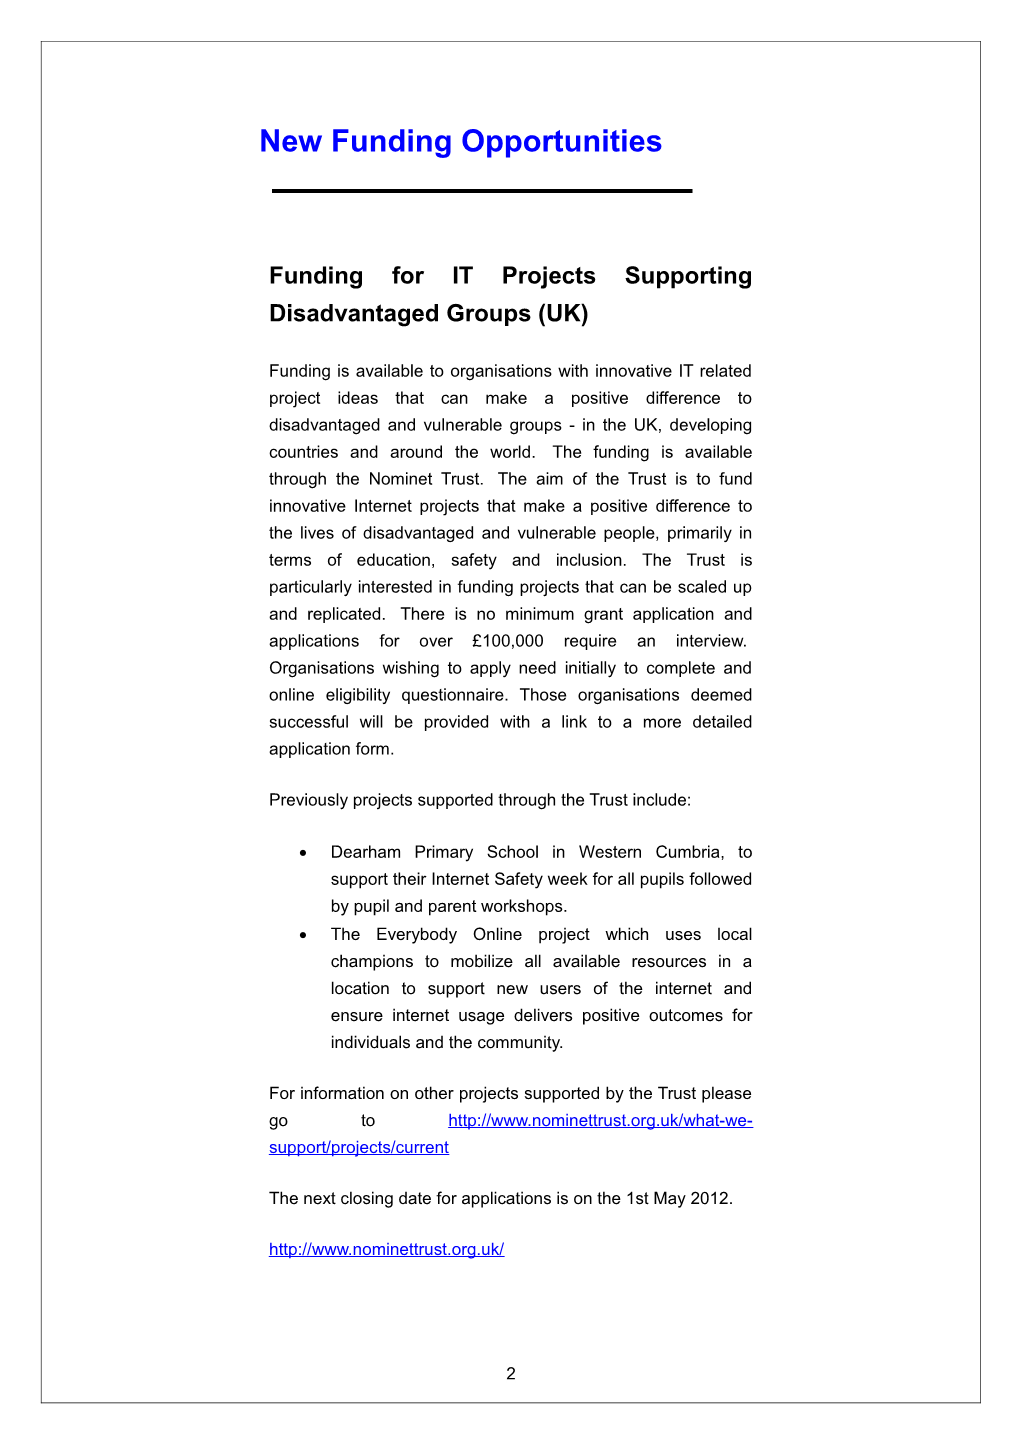 Funding for IT Projects Supporting Disadvantaged Groups (UK)